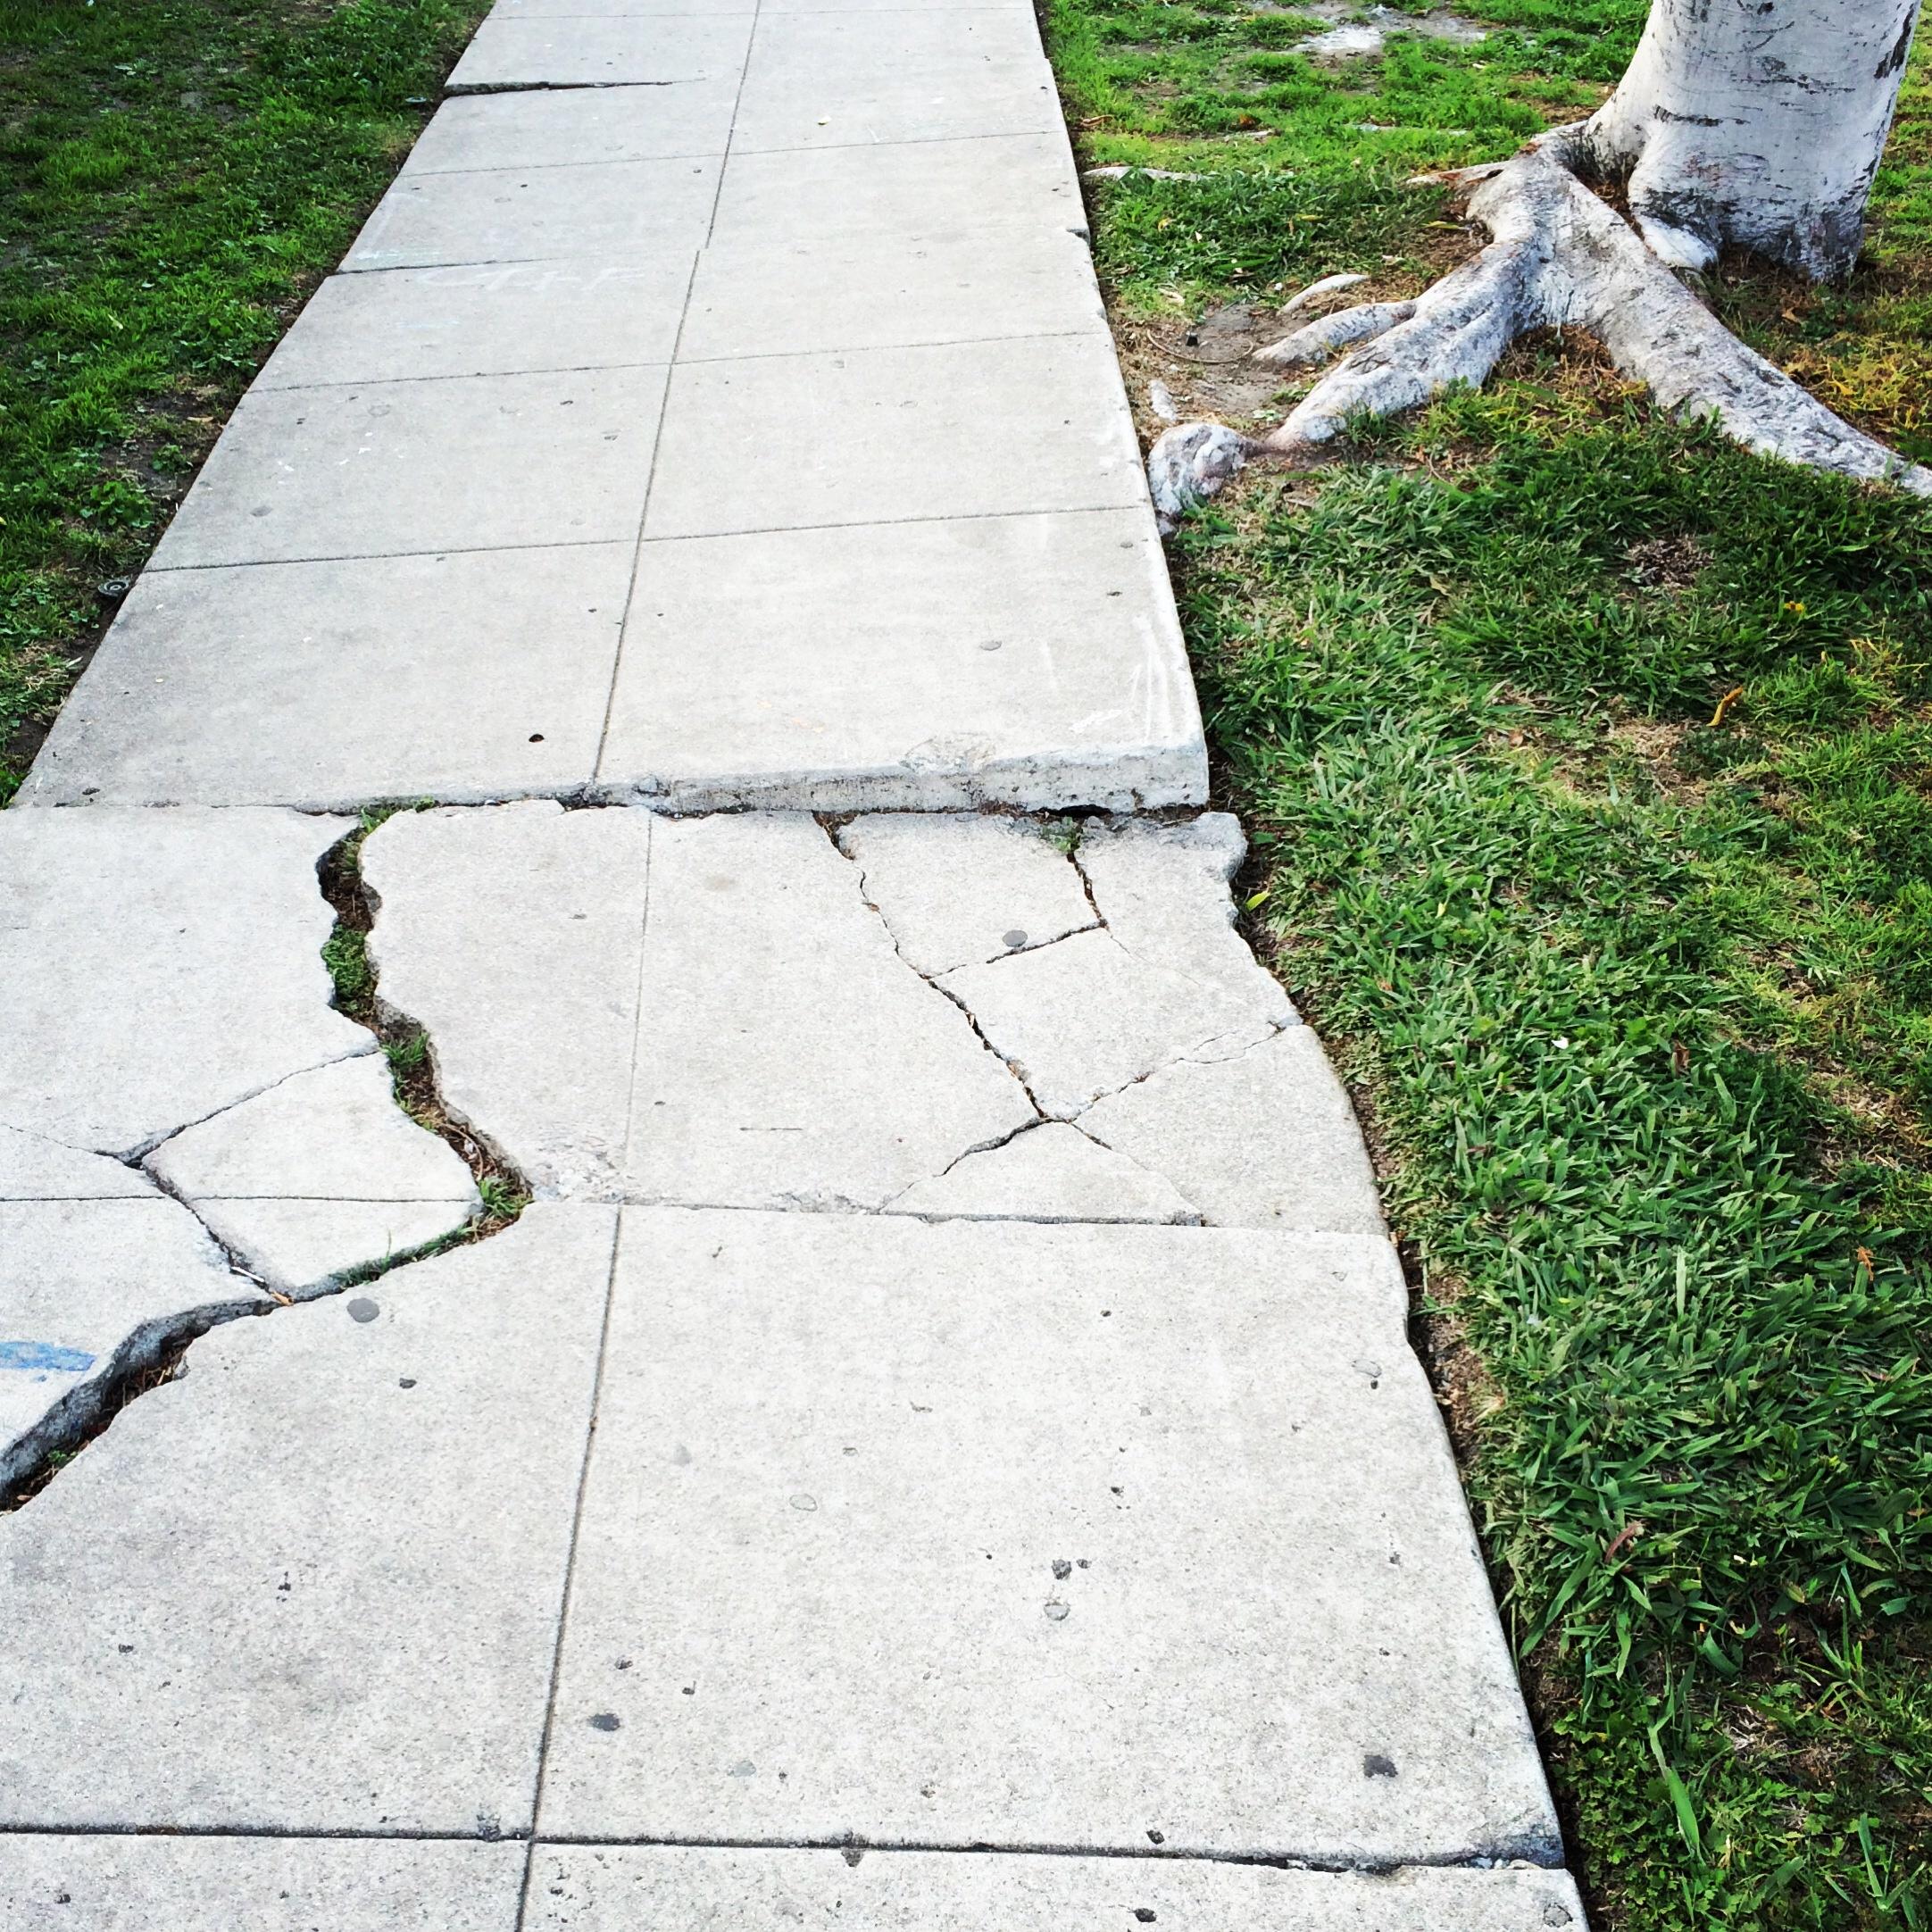 New York Property Owners May Be Liable for Sidewalk Fall Even if Defect Doesn’t Abut Their Property